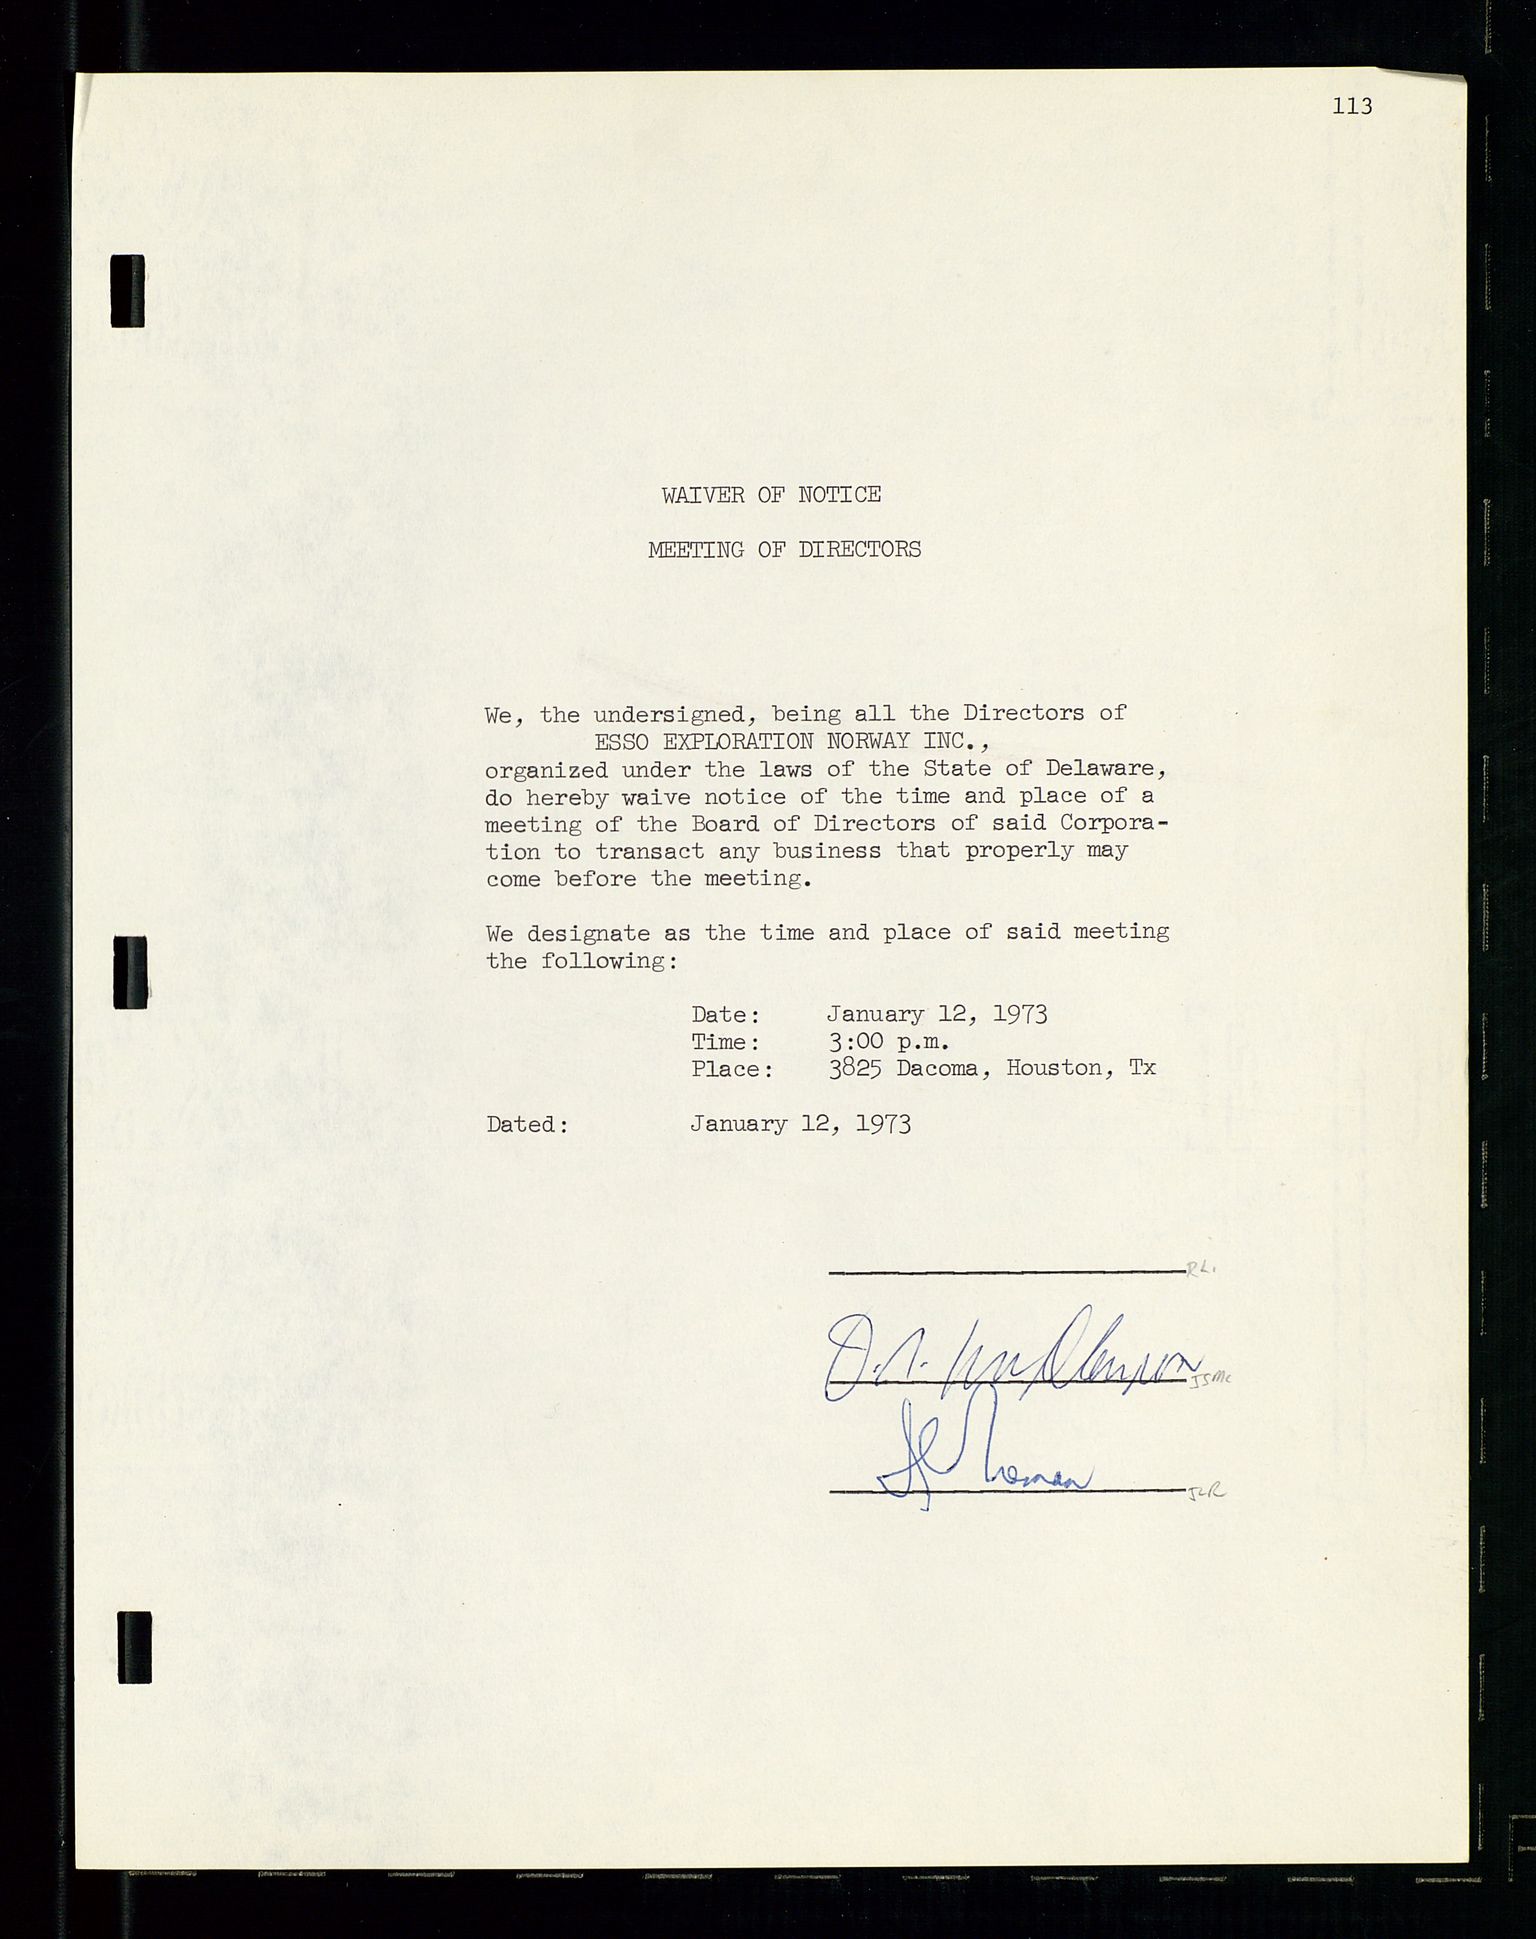 Pa 1512 - Esso Exploration and Production Norway Inc., SAST/A-101917/A/Aa/L0001/0001: Styredokumenter / Corporate records, By-Laws, Board meeting minutes, Incorporations, 1965-1975, s. 113